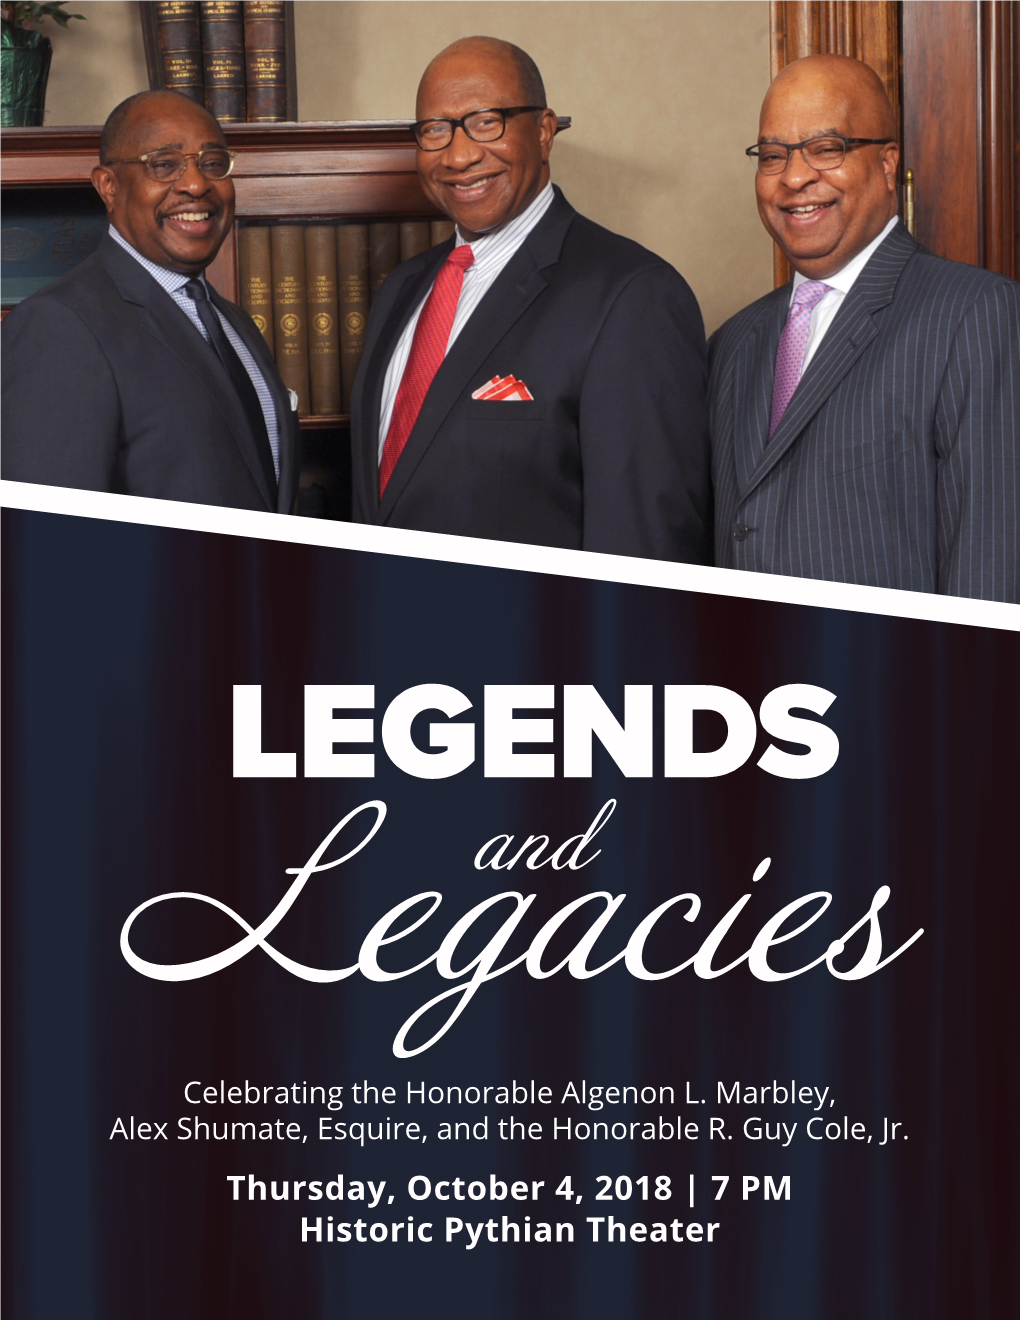 Thursday, October 4, 2018 | 7 PM Historic Pythian Theater 12TH ANNUAL LEGENDS And